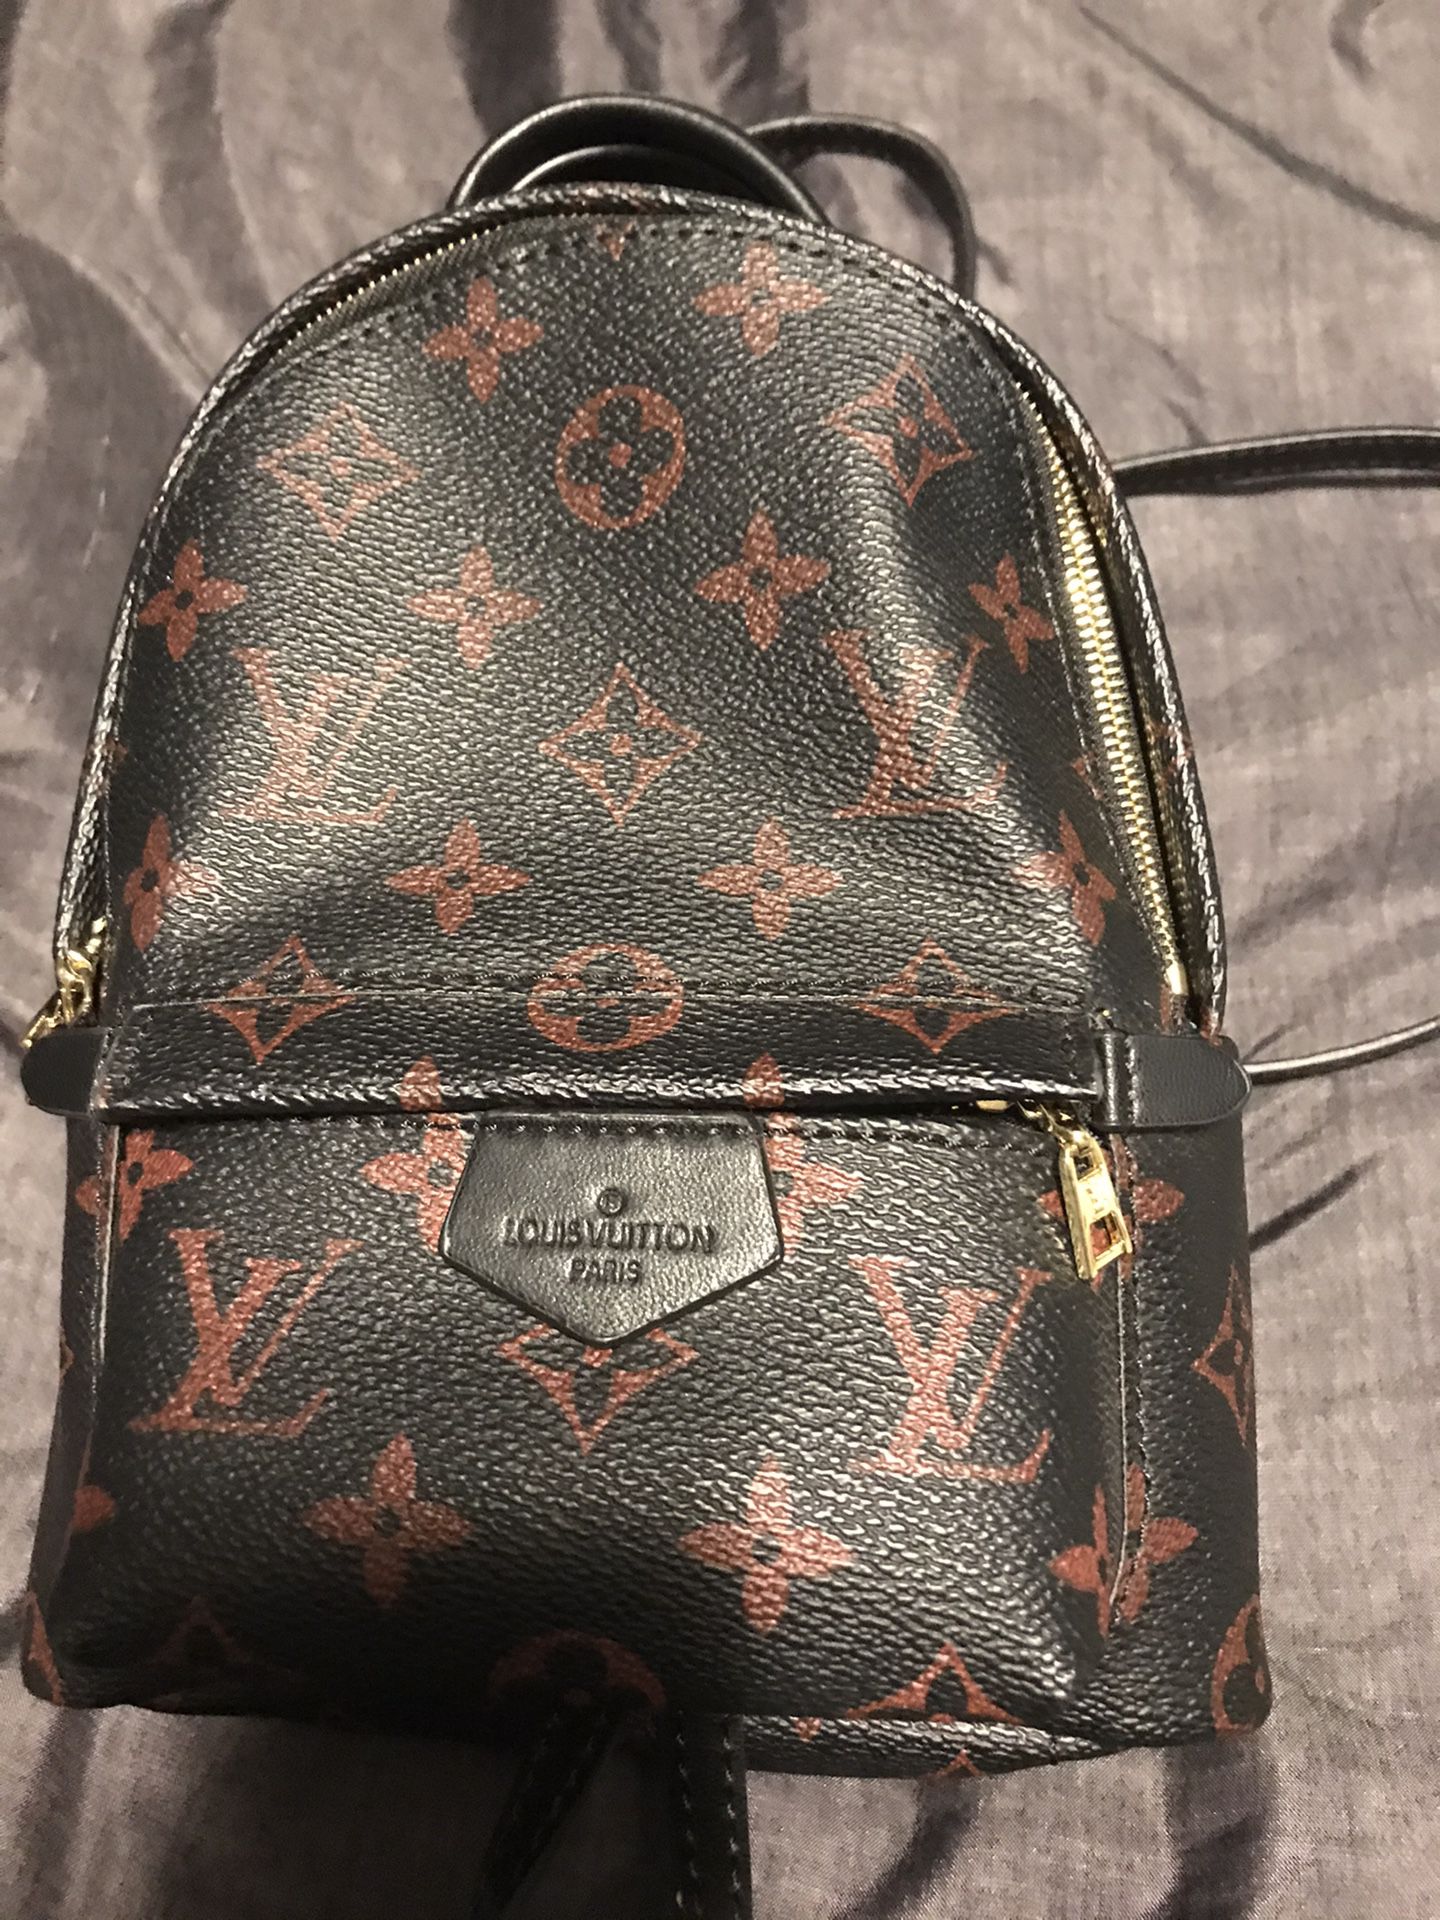 Louis Vuitton Palm Springs PM Backpack for Sale in Stratford, CT - OfferUp